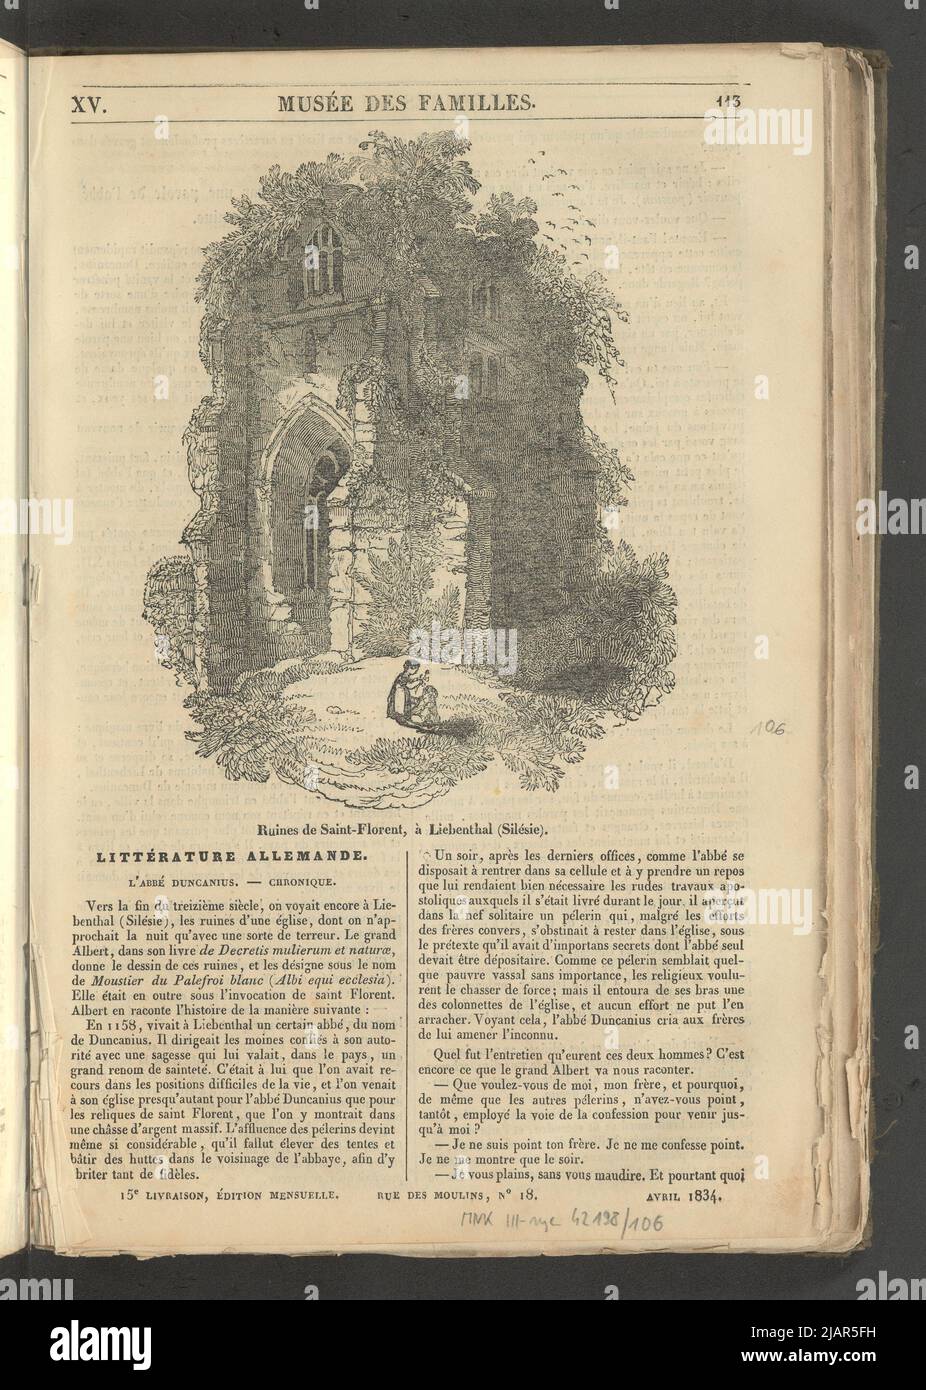 Yearbook 2, notebook 15, April 1834 ruins of the church of St. Floriana in Liebenthal (Lubomierz) in Silesia, illustration for the article Litterature Allemande in: Musee des Familles, Lecture du Soir. T. 1. (year 1 and 2) Paris, [1833 1834]. unknown Stock Photo